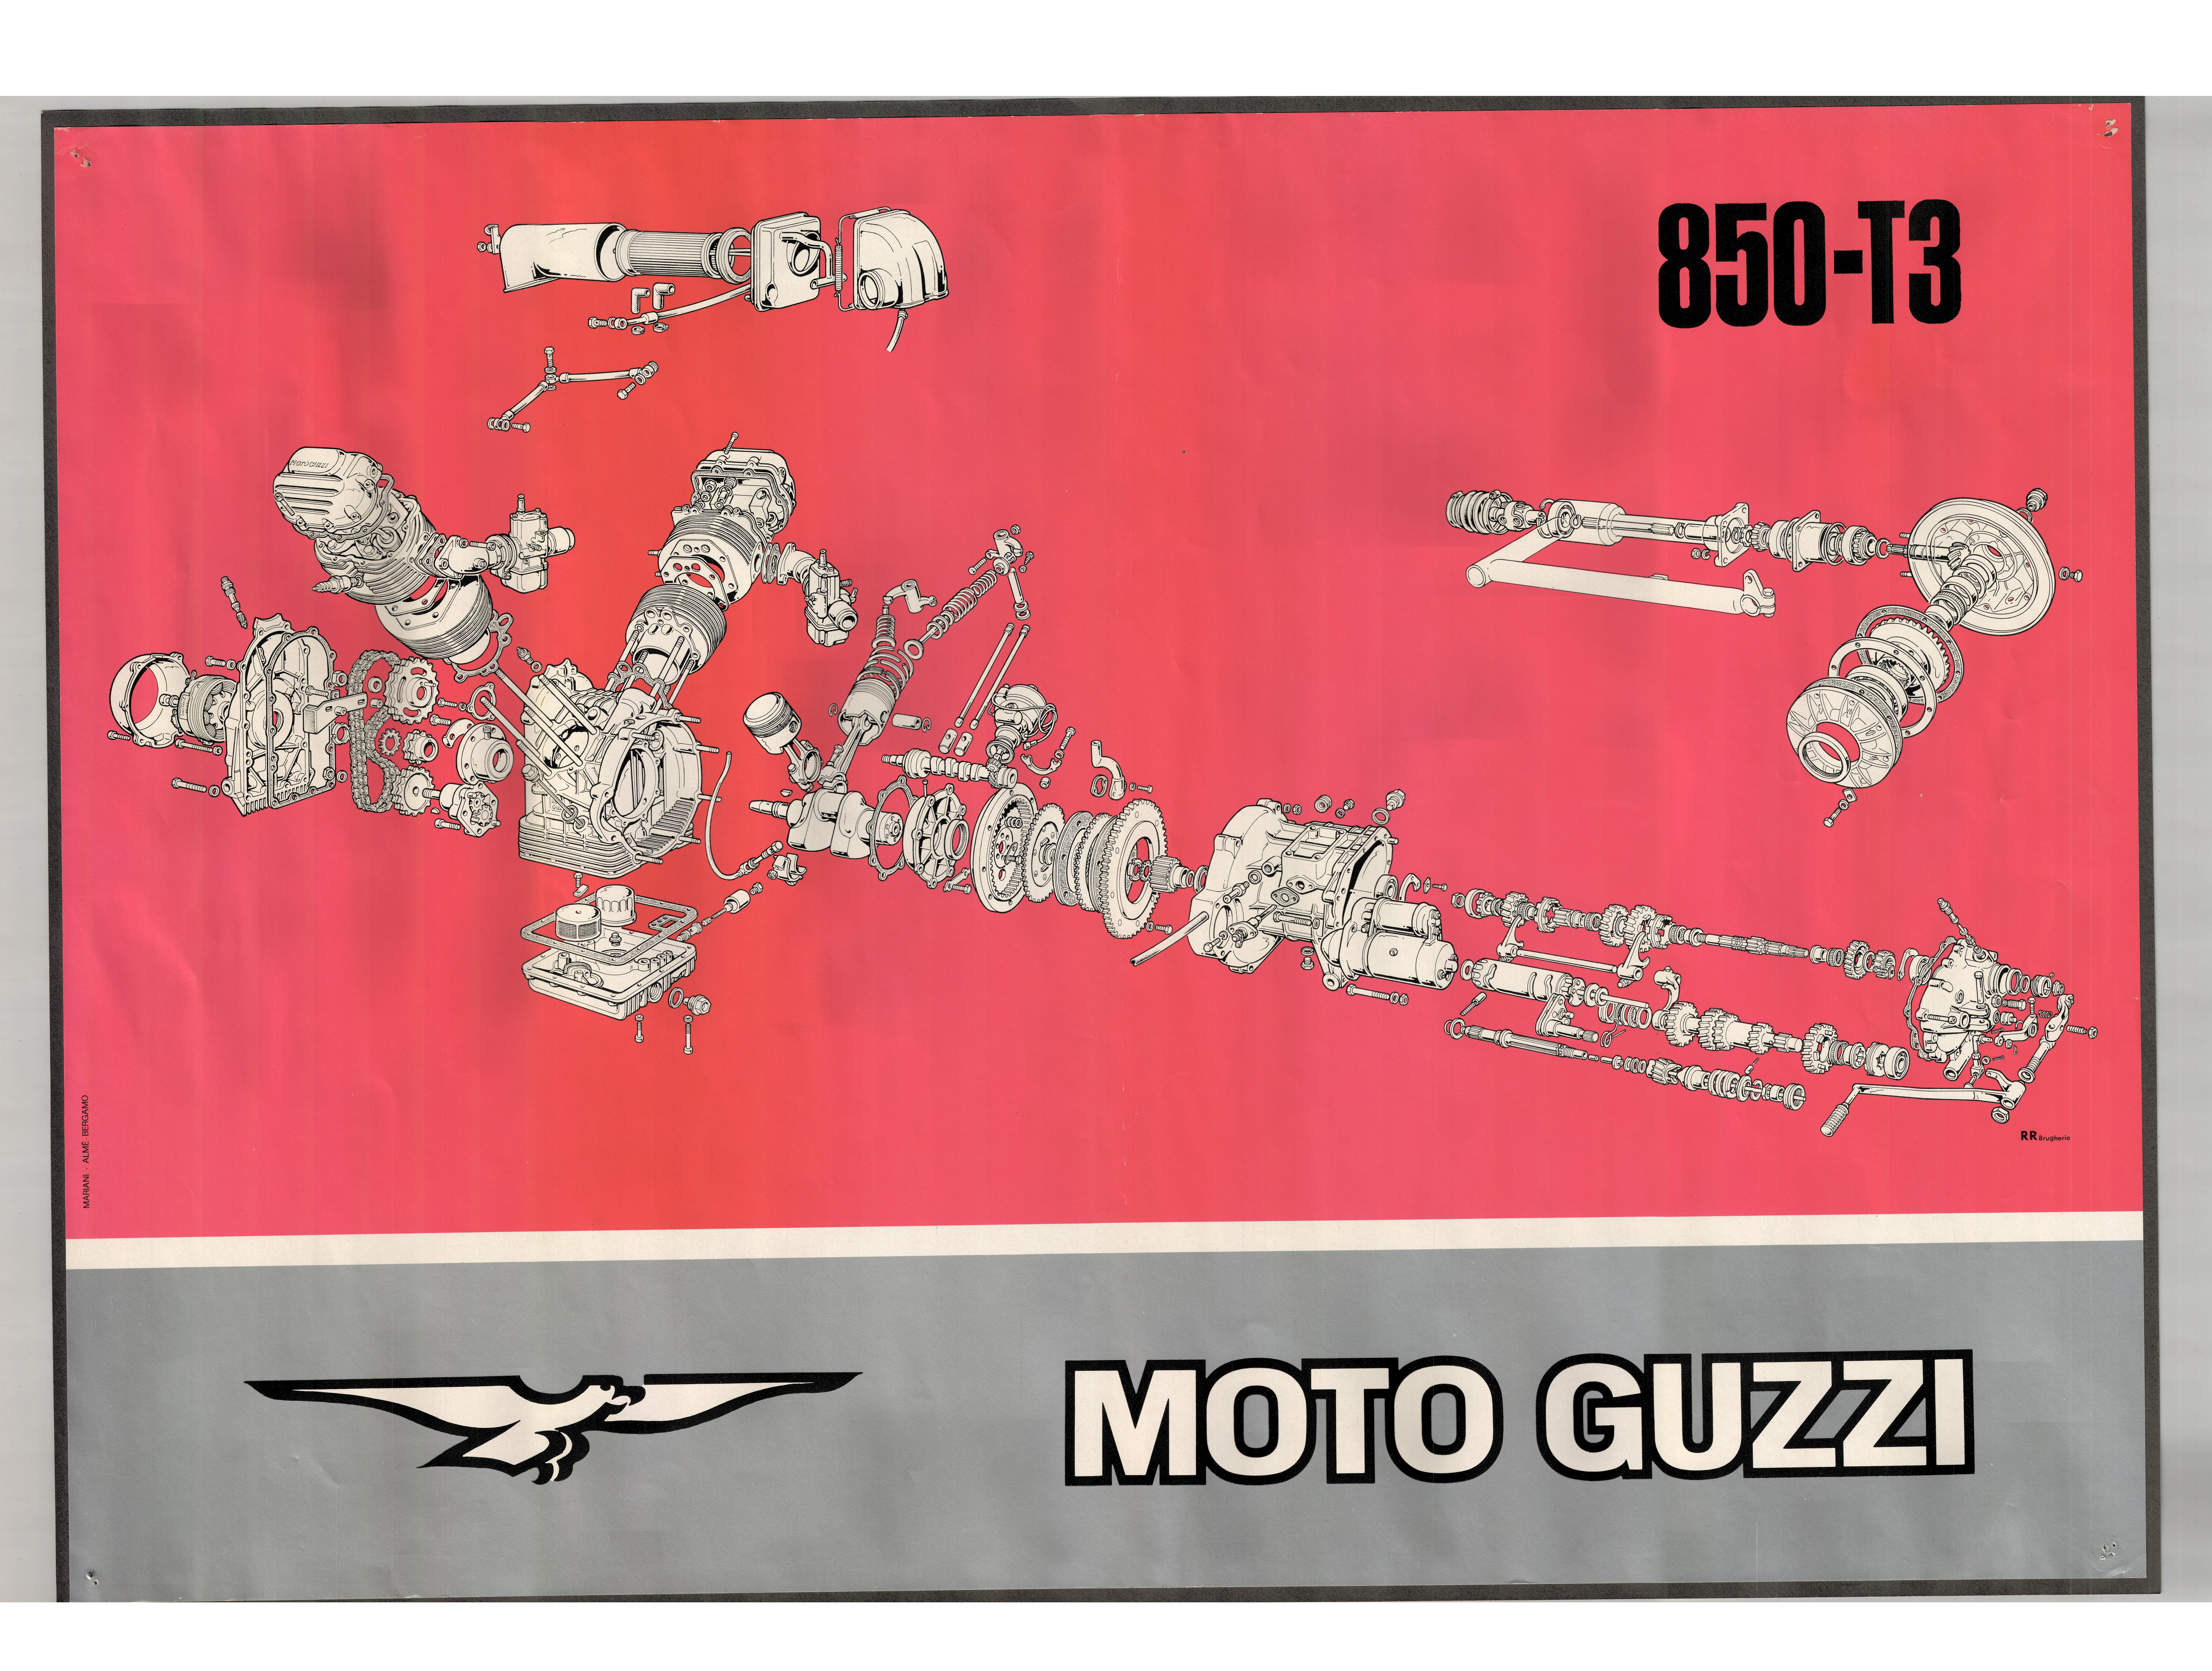 Poster - Exploded view of the Moto Guzzi 850 T3 engine, transmission, and rear drive (original scan).